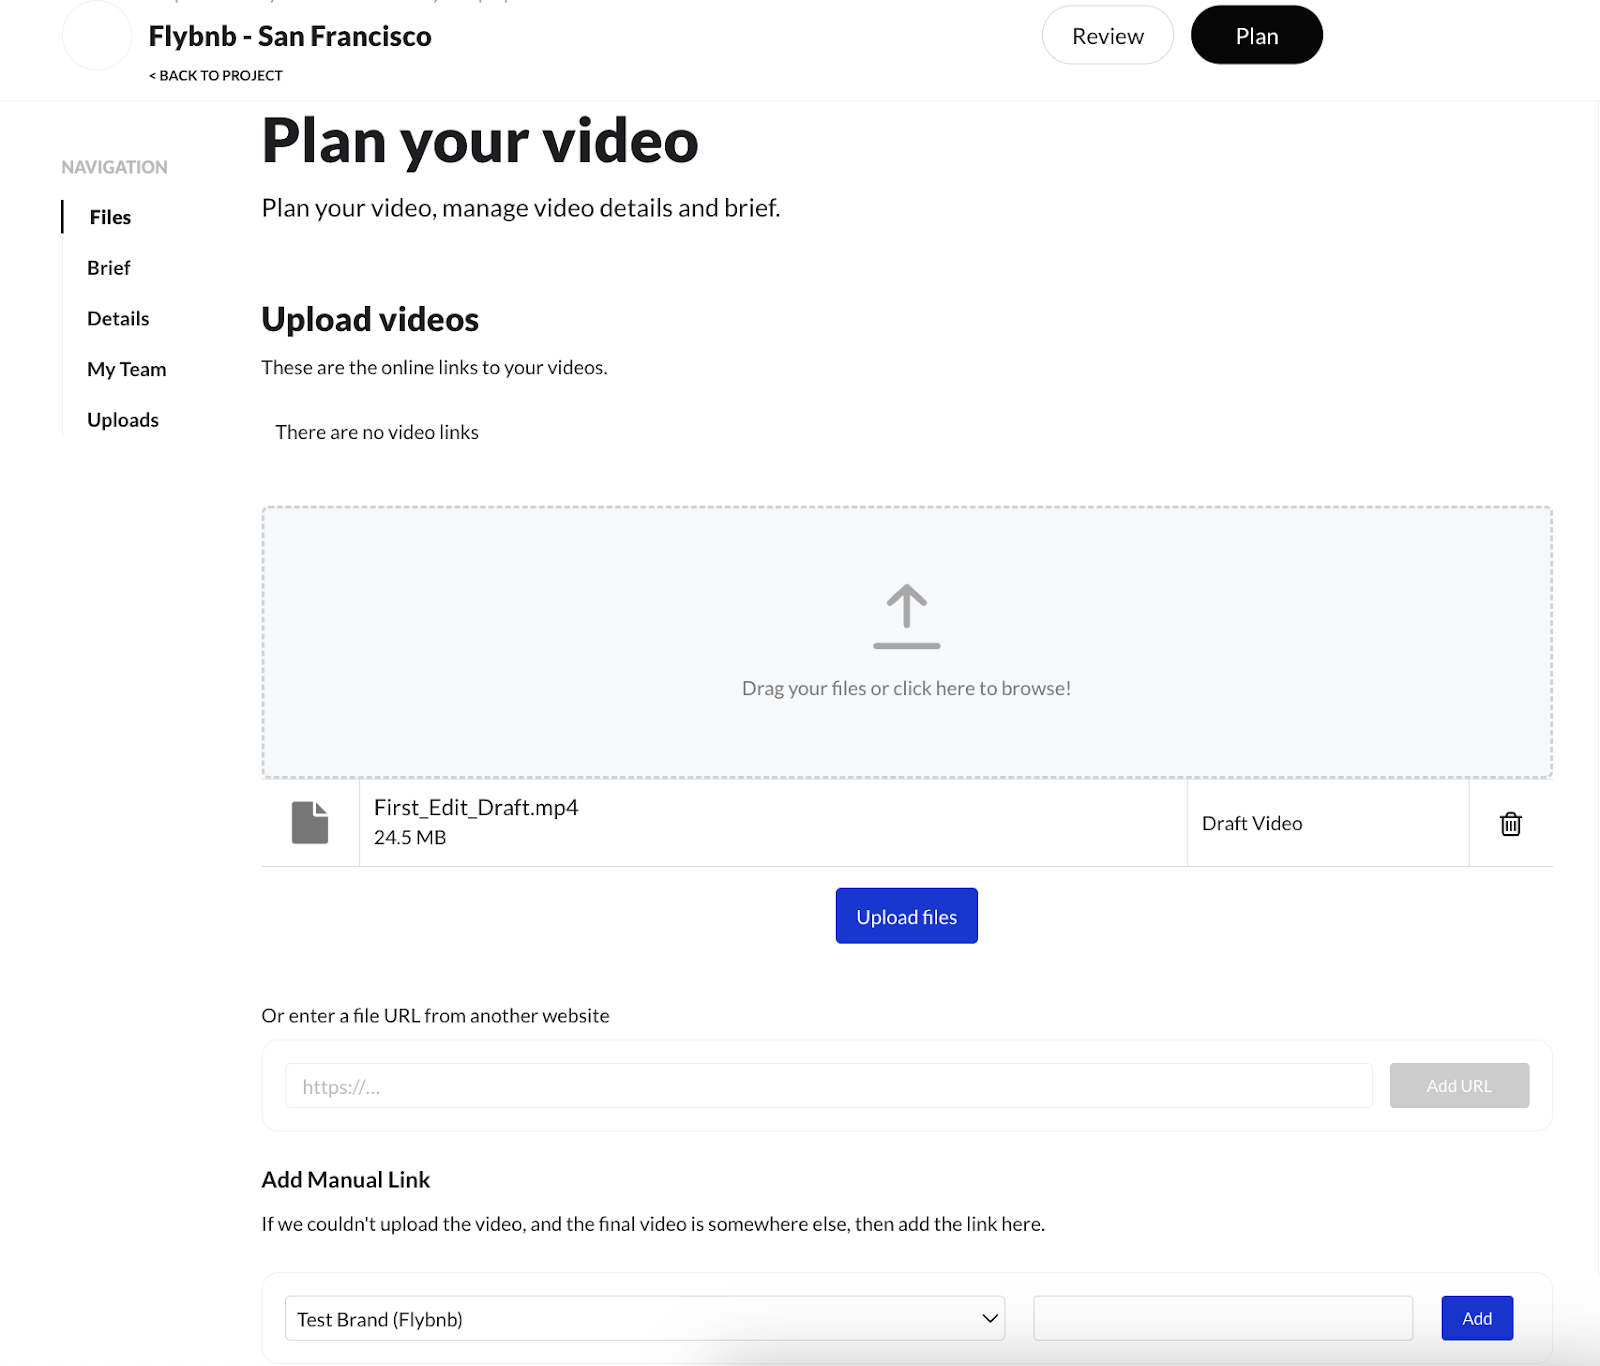 Under the first section titled ‘Upload Videos’, click on the grey box to select and upload your edits.